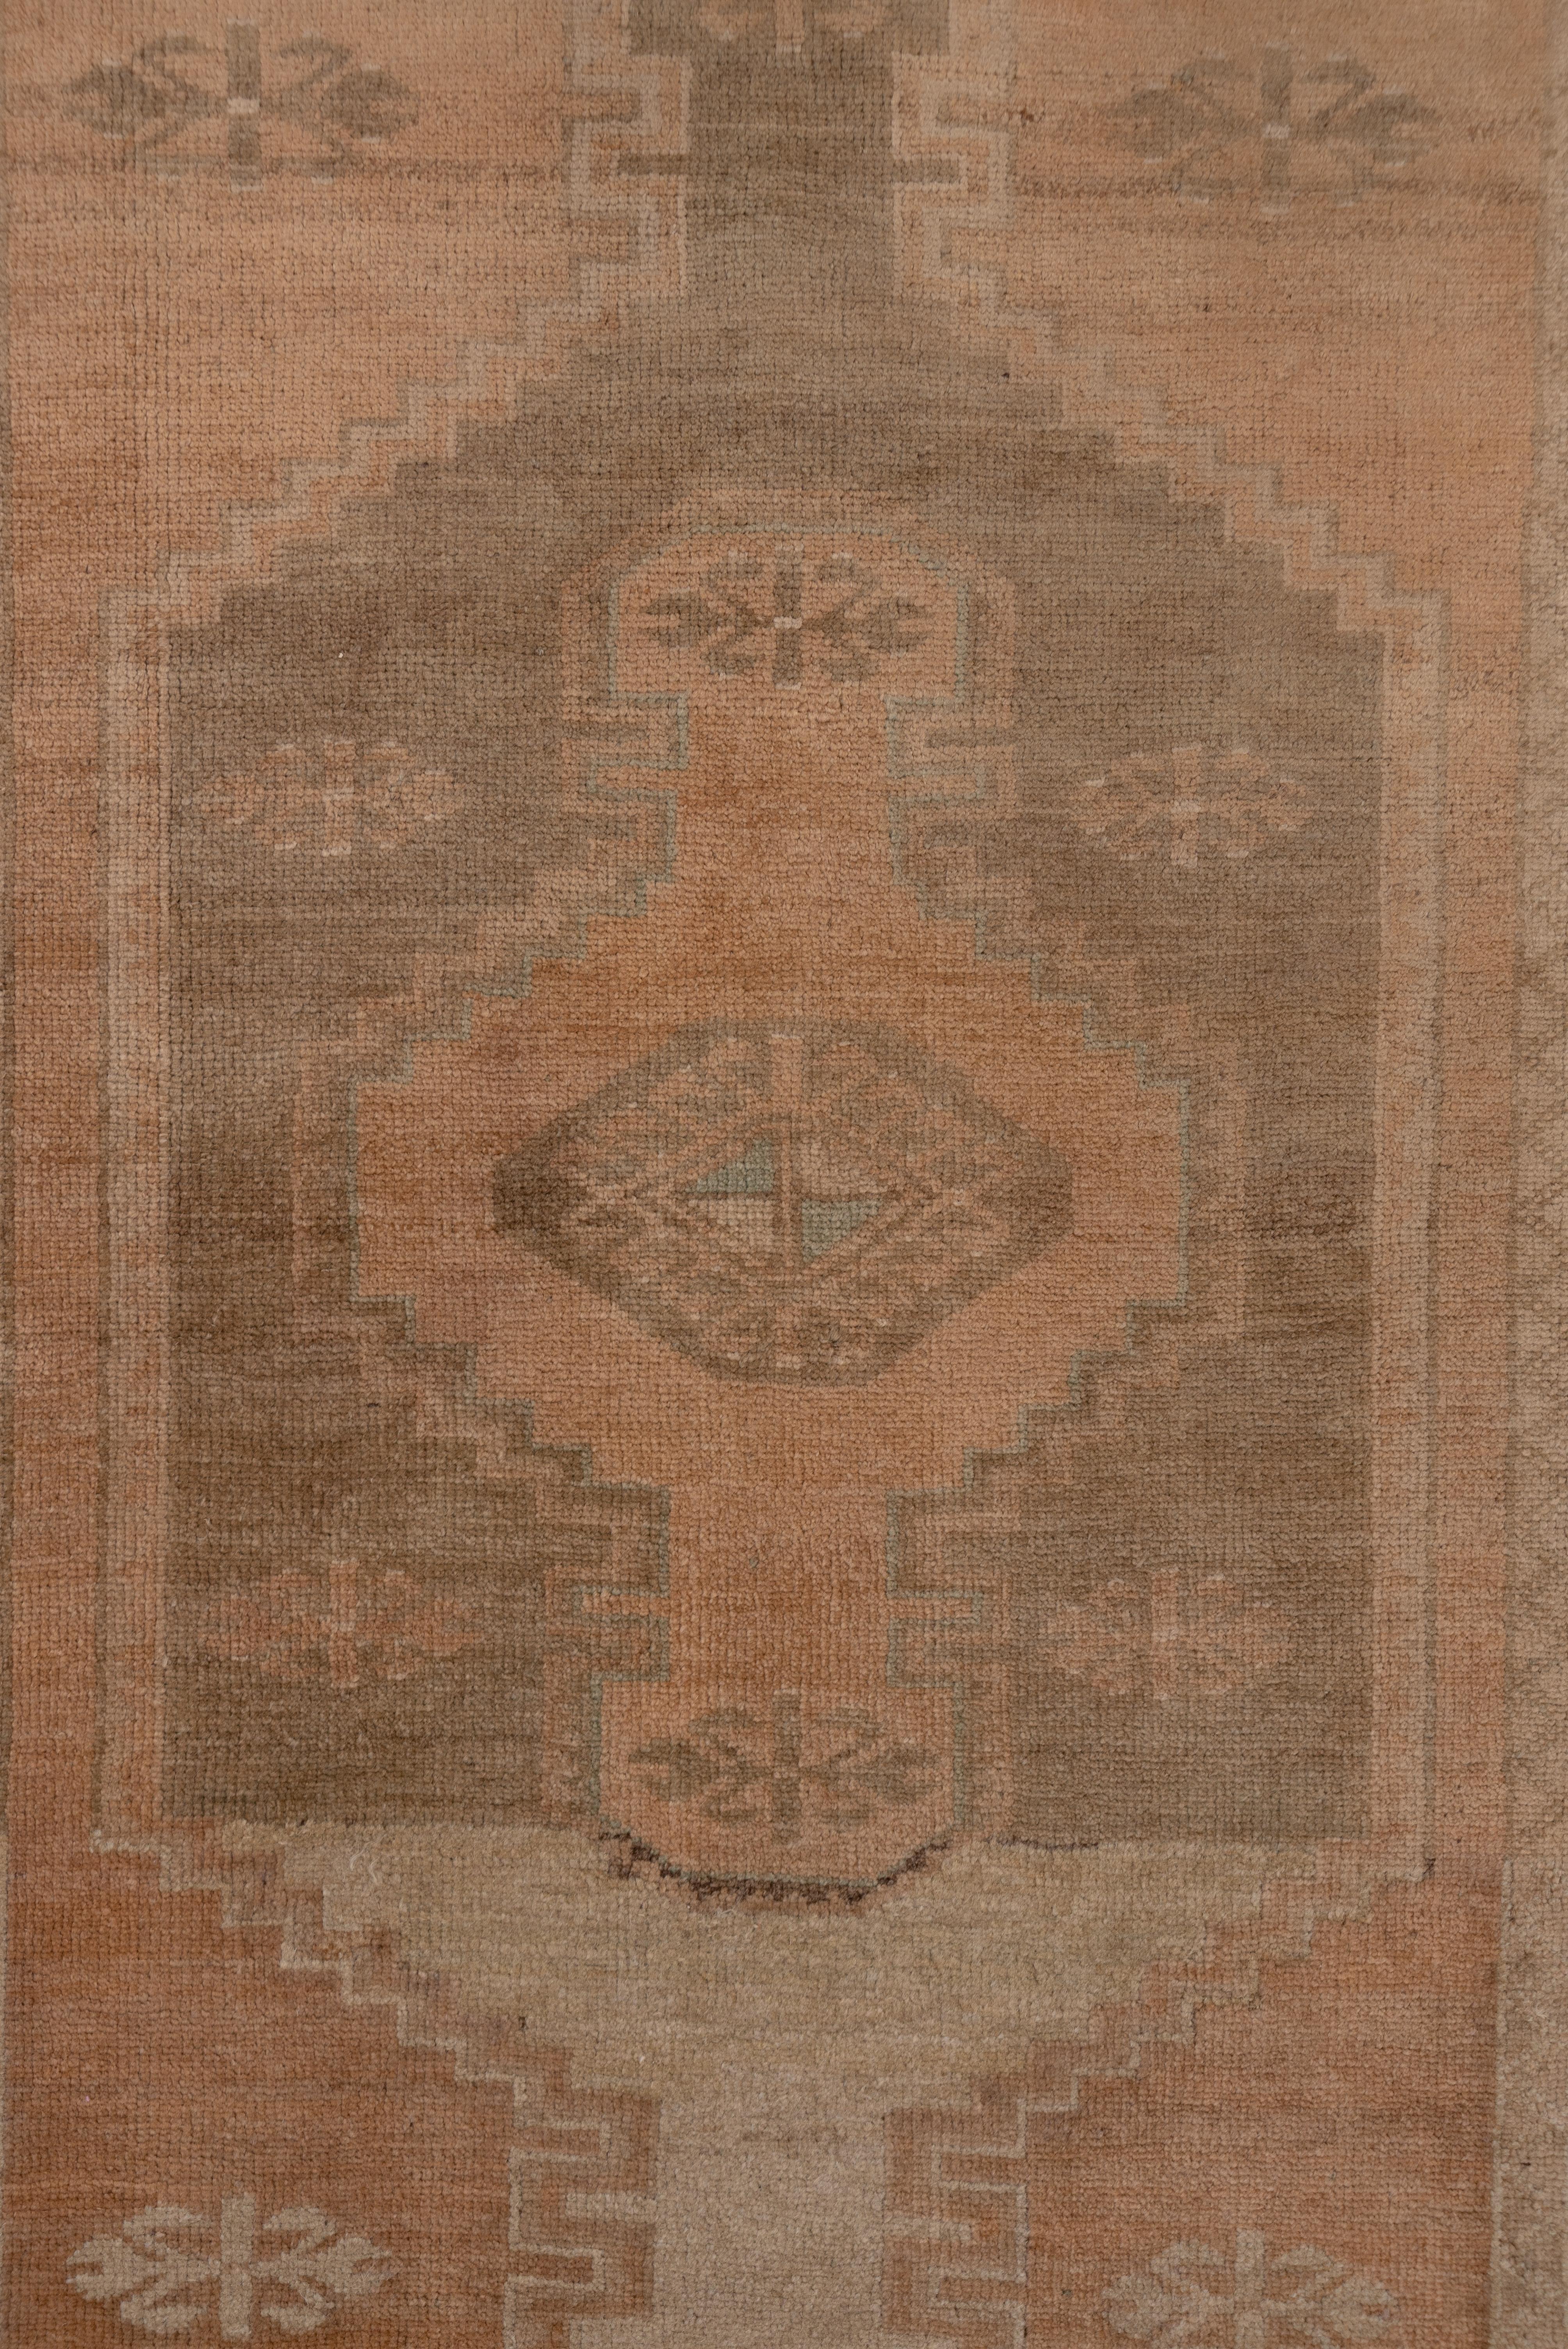 This eastern Turkish narrow runner features an abrashed soft salmon ground with three complete end stepped cartouche medallions in sand, pale coral, and ecru beige. The abrash extends to the zig-zag narrow border.